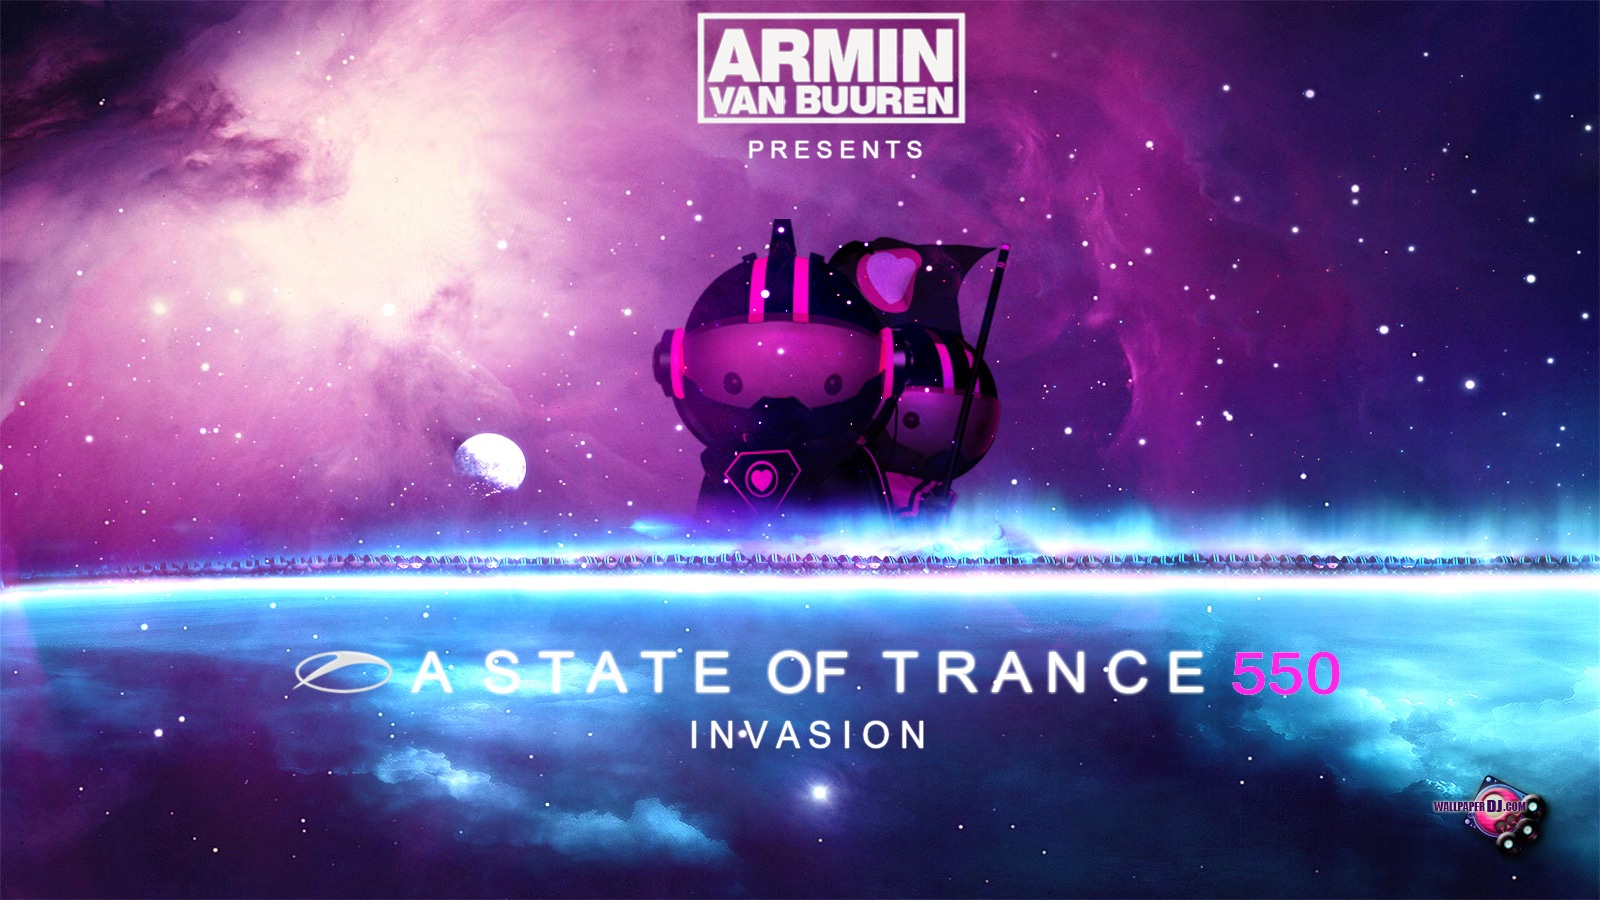 A State Of Trance Wallpaper Music And Dance